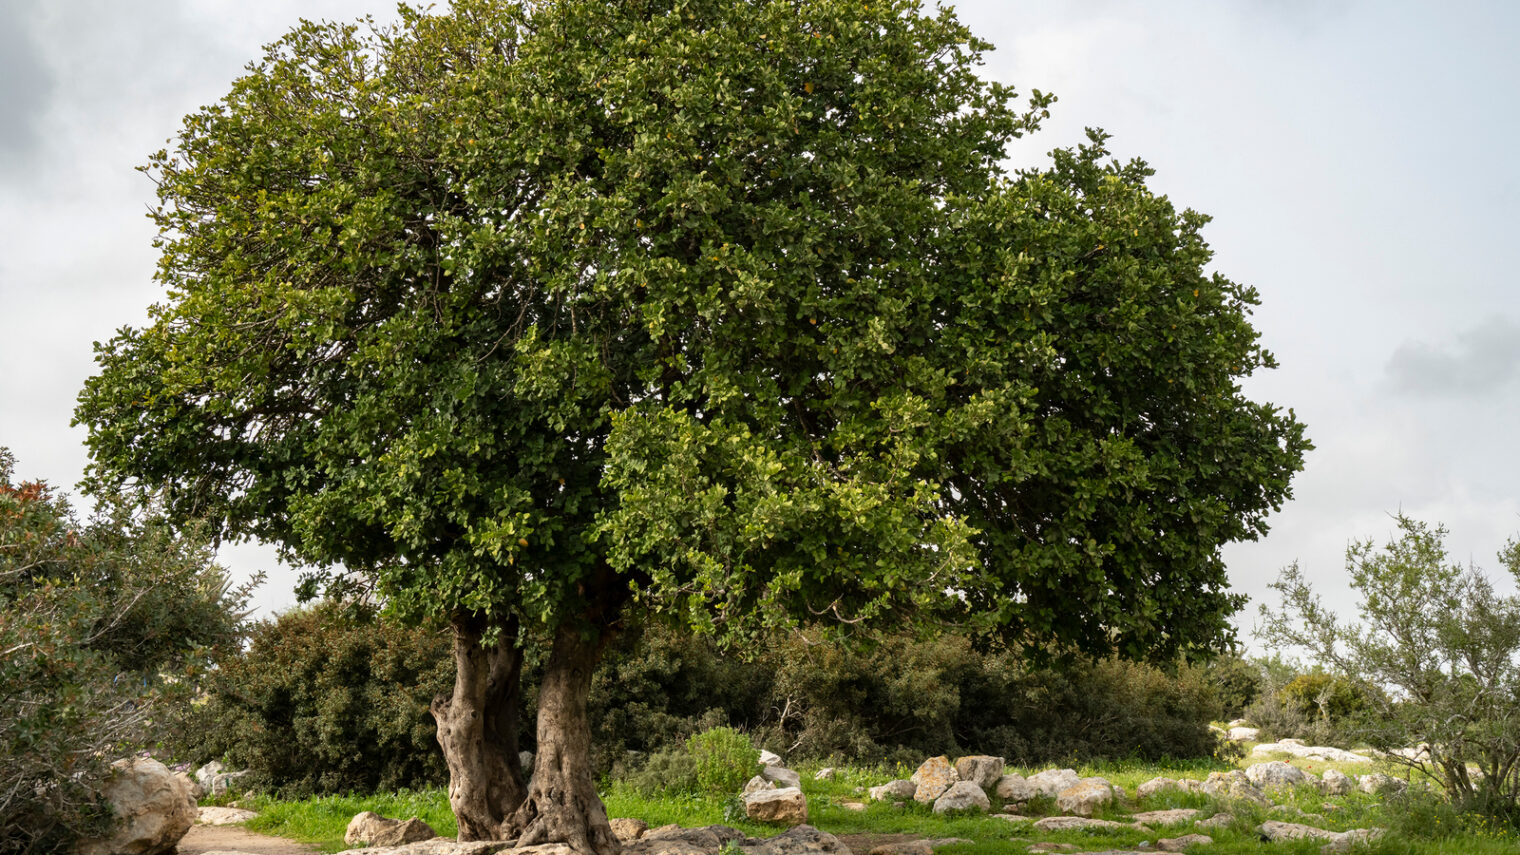 Carobway trees like this ancient one growing on a hilltop in the Adullam region of Israel, are highly acclimatized to the country’s desert climate. Photo by Moshe Einhorn, Shutterstock